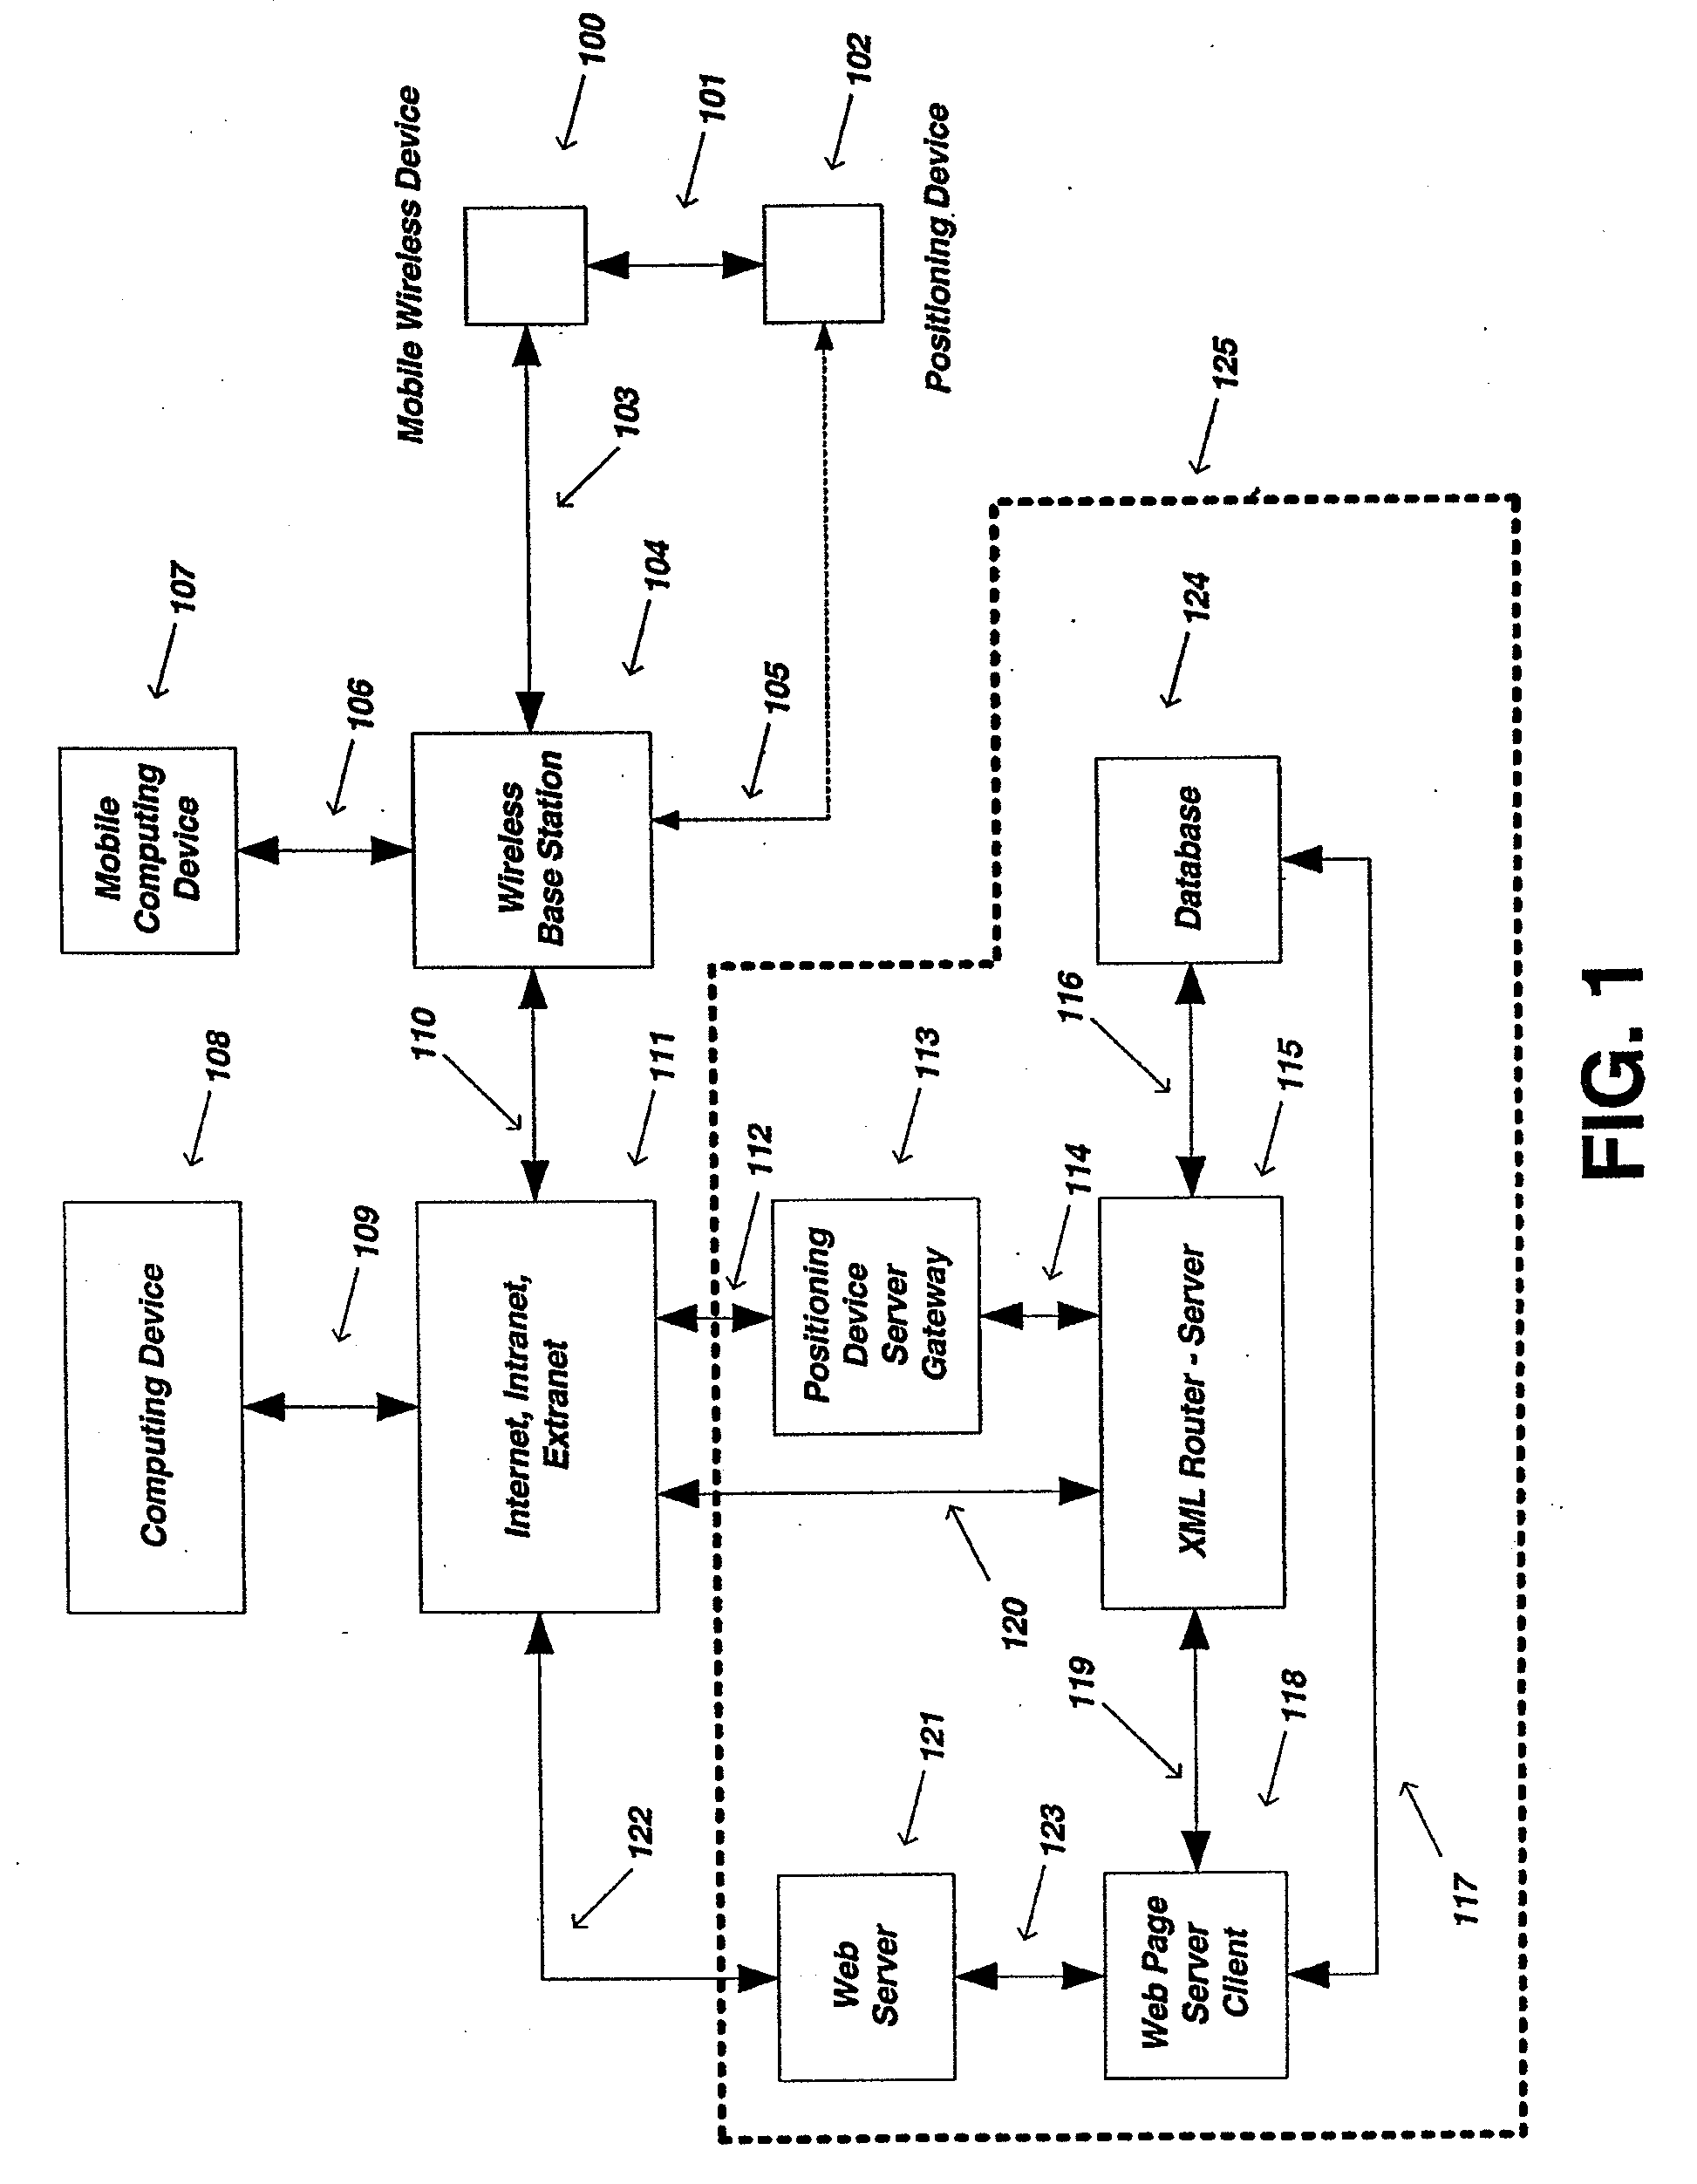 Method and System for Dynamic Estimation and Predictive Route Generation